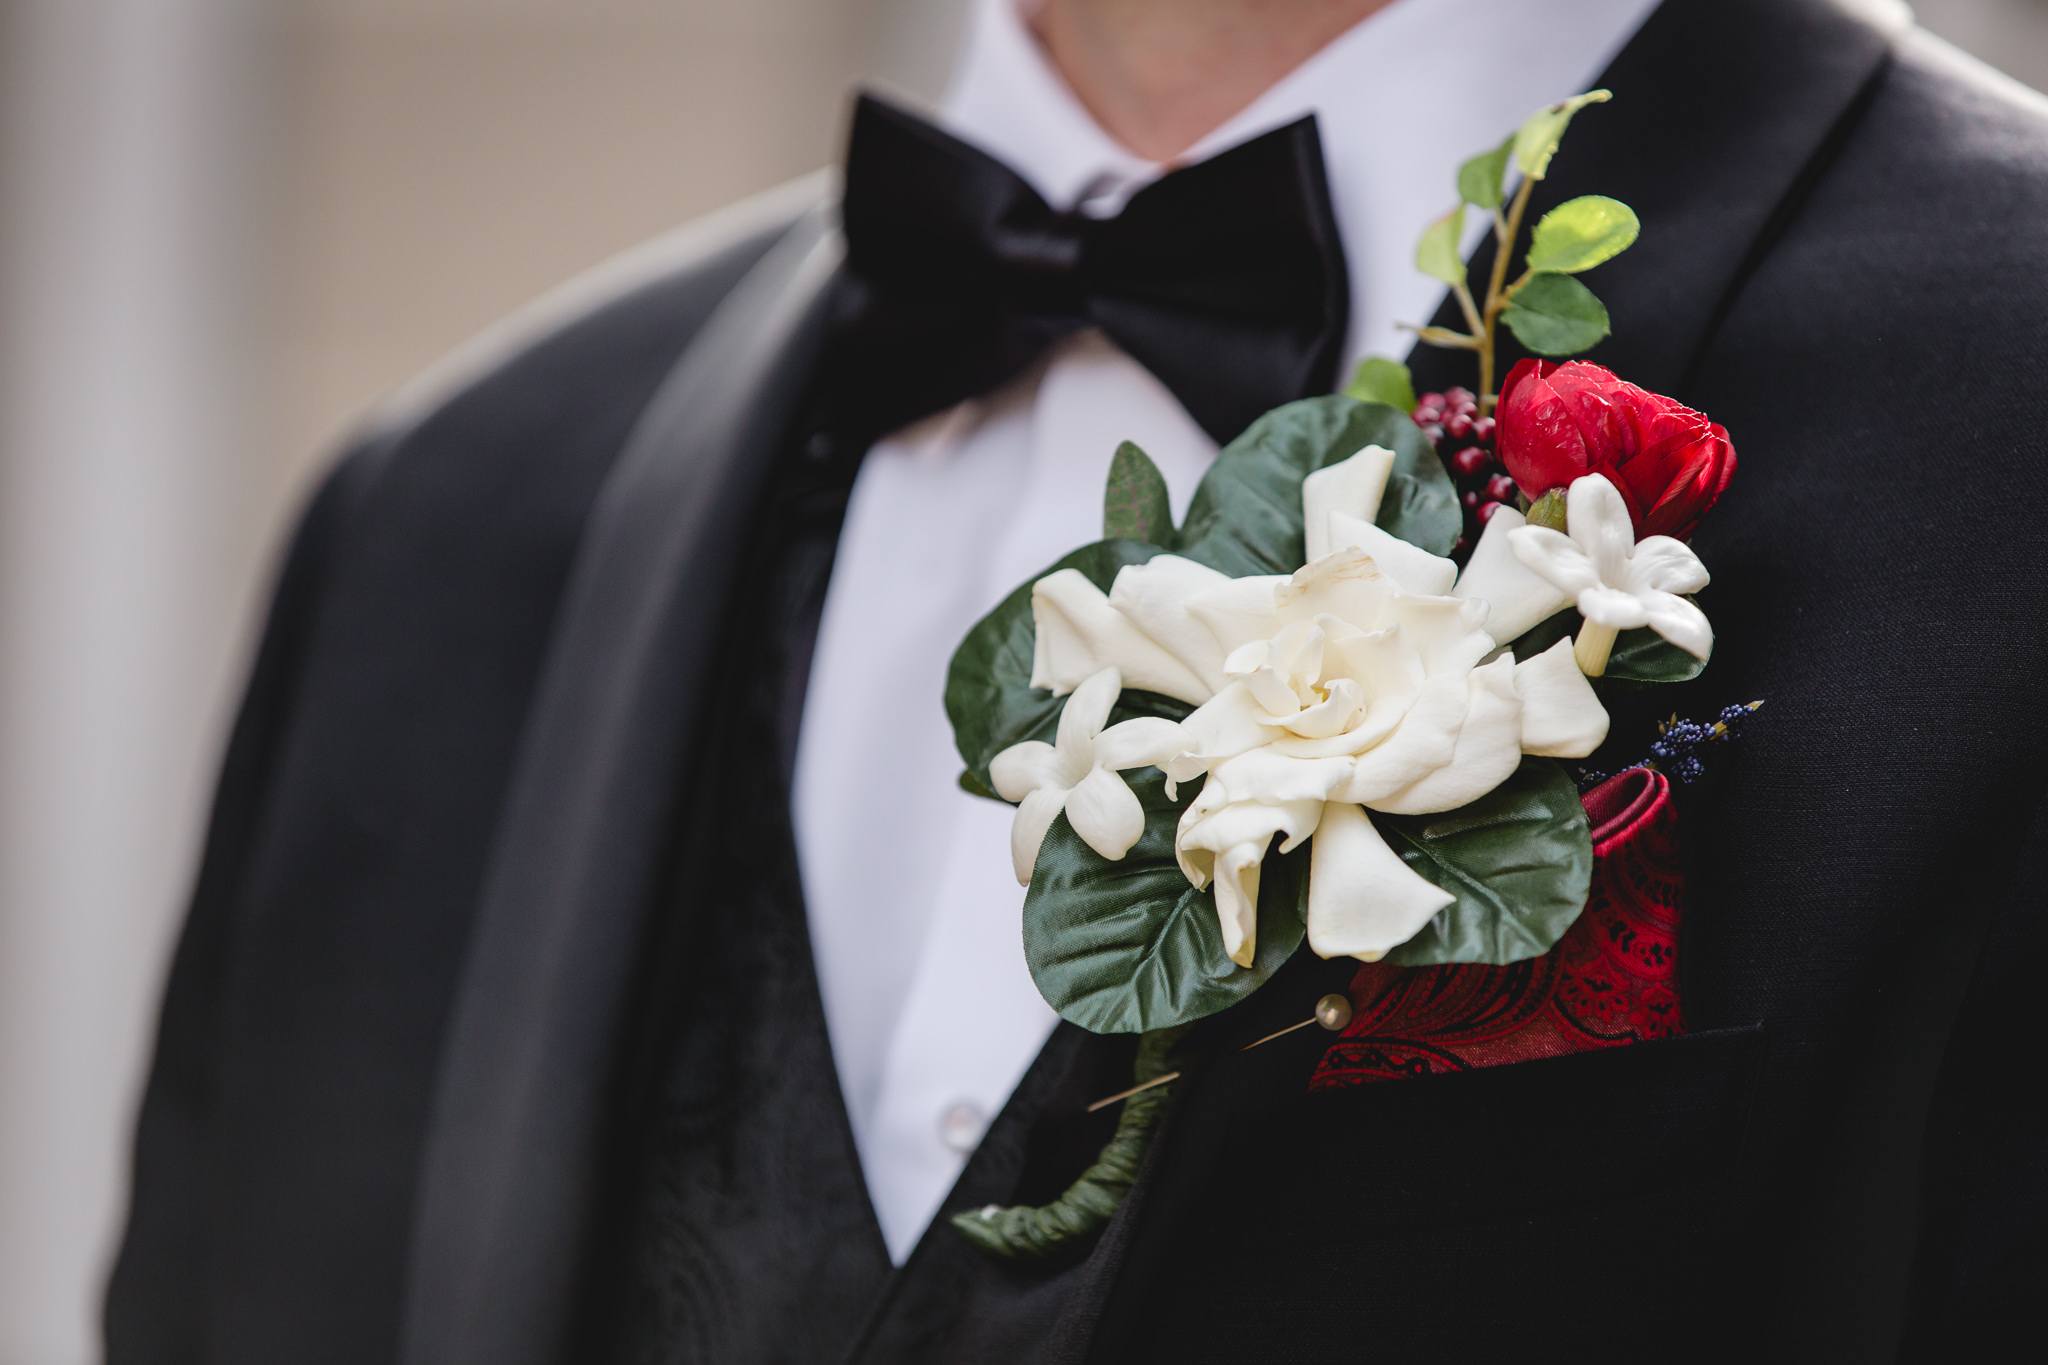 Close up of groom's boutonniere of white flowers and red accents